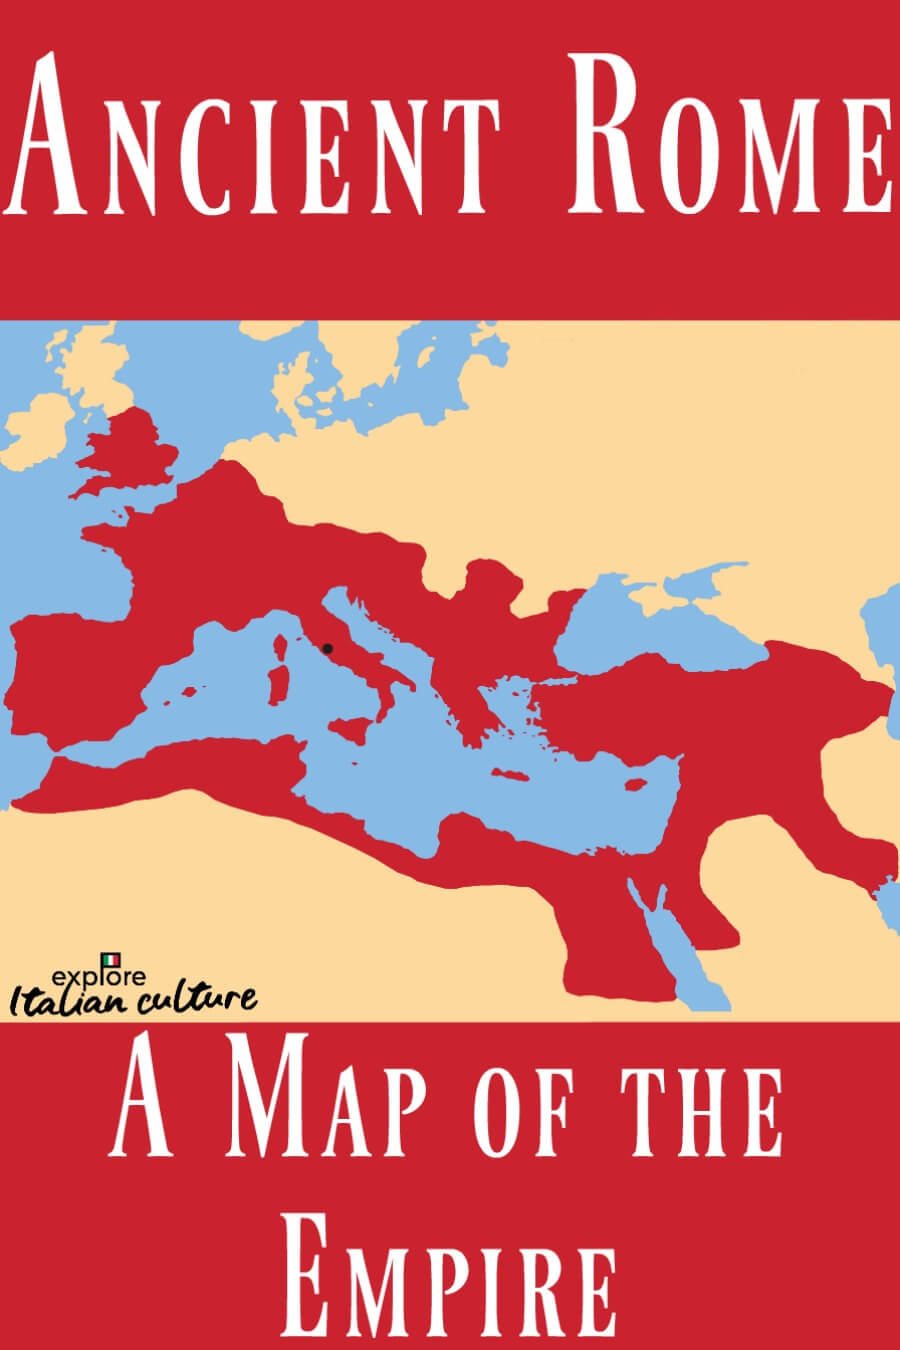 Ancient Origins - A referenced map of the Roman Empire at its